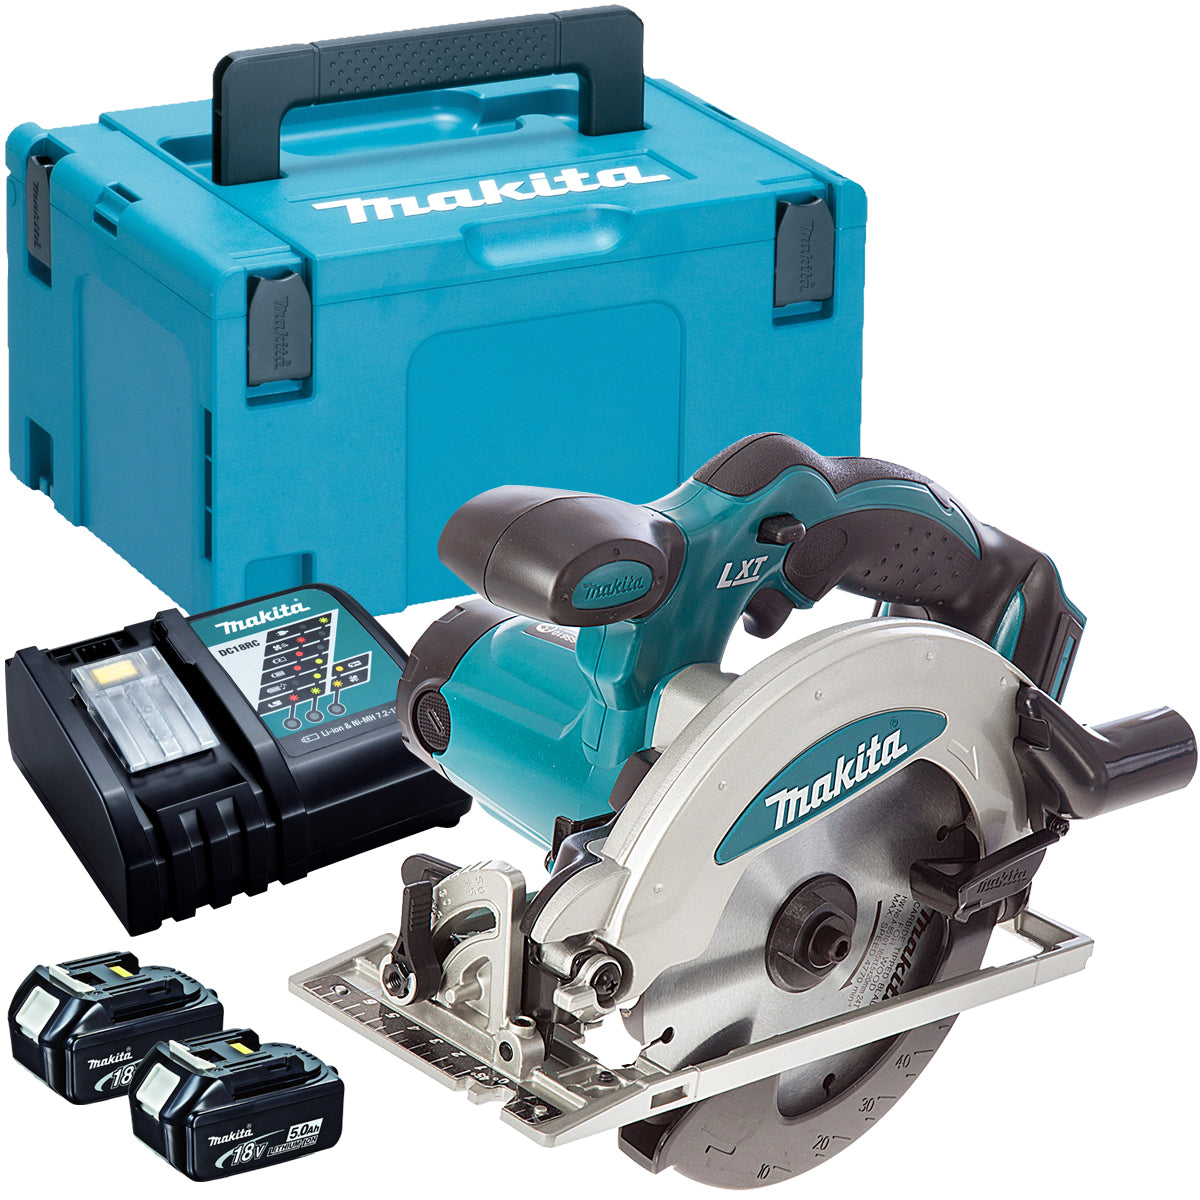 Makita DSS610Z 18V 165mm Circular Saw with 2 x 5.0Ah Batteries & Charger in Case